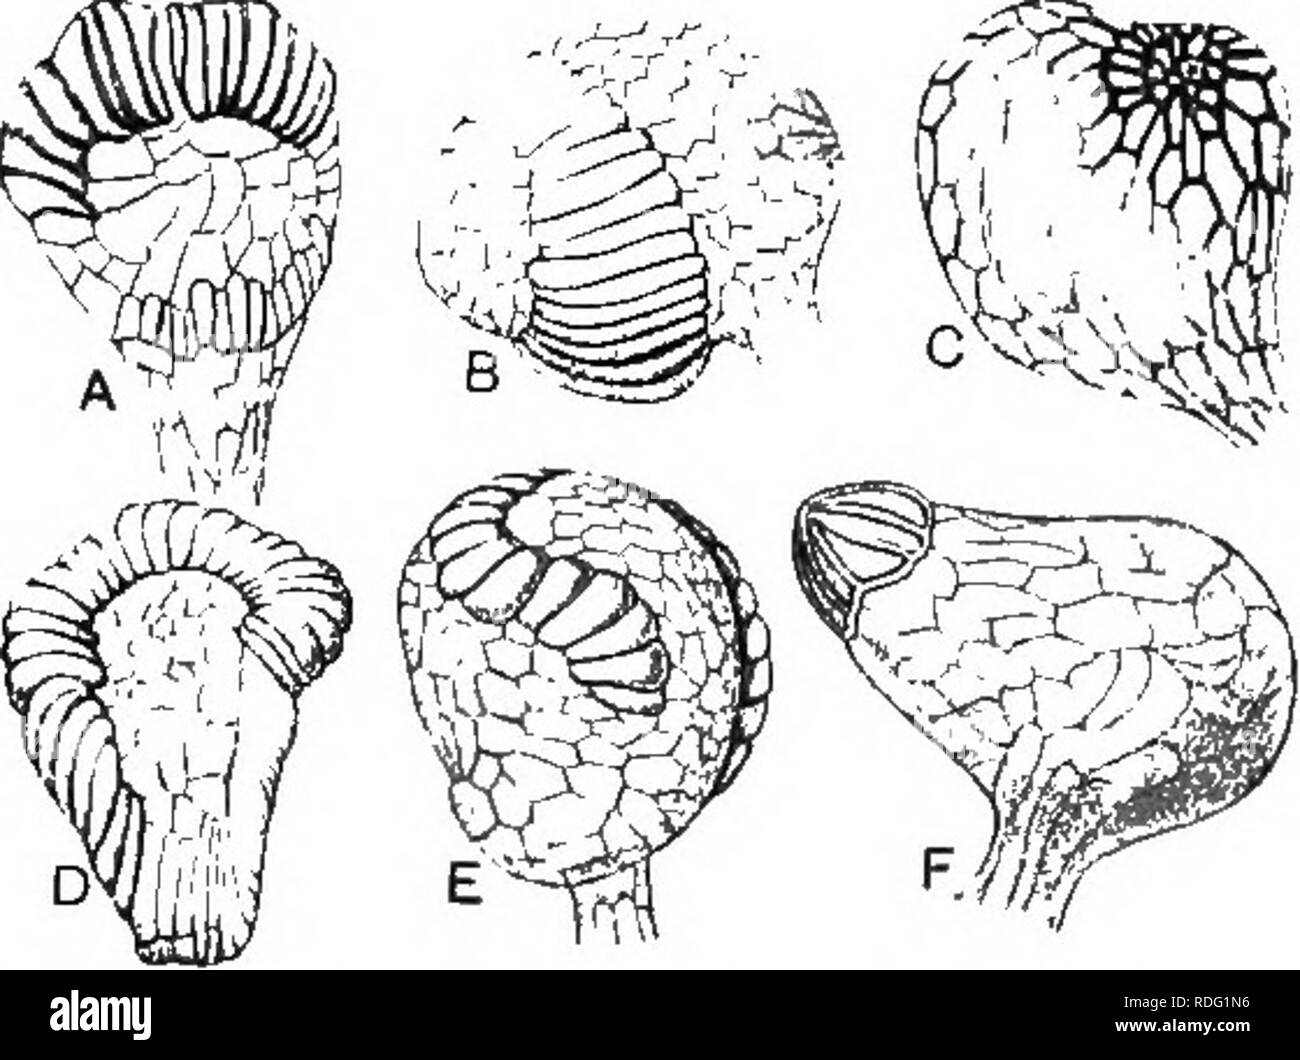 . Heredity and evolution in plants. Heredity; Plants. LIFE HISTORY OF A FERN II always possess some form of annulus. As the sporangia mature the spore-case itself becomes differentiated into two distinct kinds of tissue, namely, vegetative tissue on the outside, forming the wall and reproductive tissue within, from which the spores are developed. 7. Niunber of Spores.^The number of spores pro- duced by a vigorous fern is a great revelation to one who has never given such matters. careful thought. Pro-. FiG. 13.âTypes of fern sporangia. A, Loxsoma CunninghaiAl; E, Gleichenia circinata; C, Todea Stock Photo